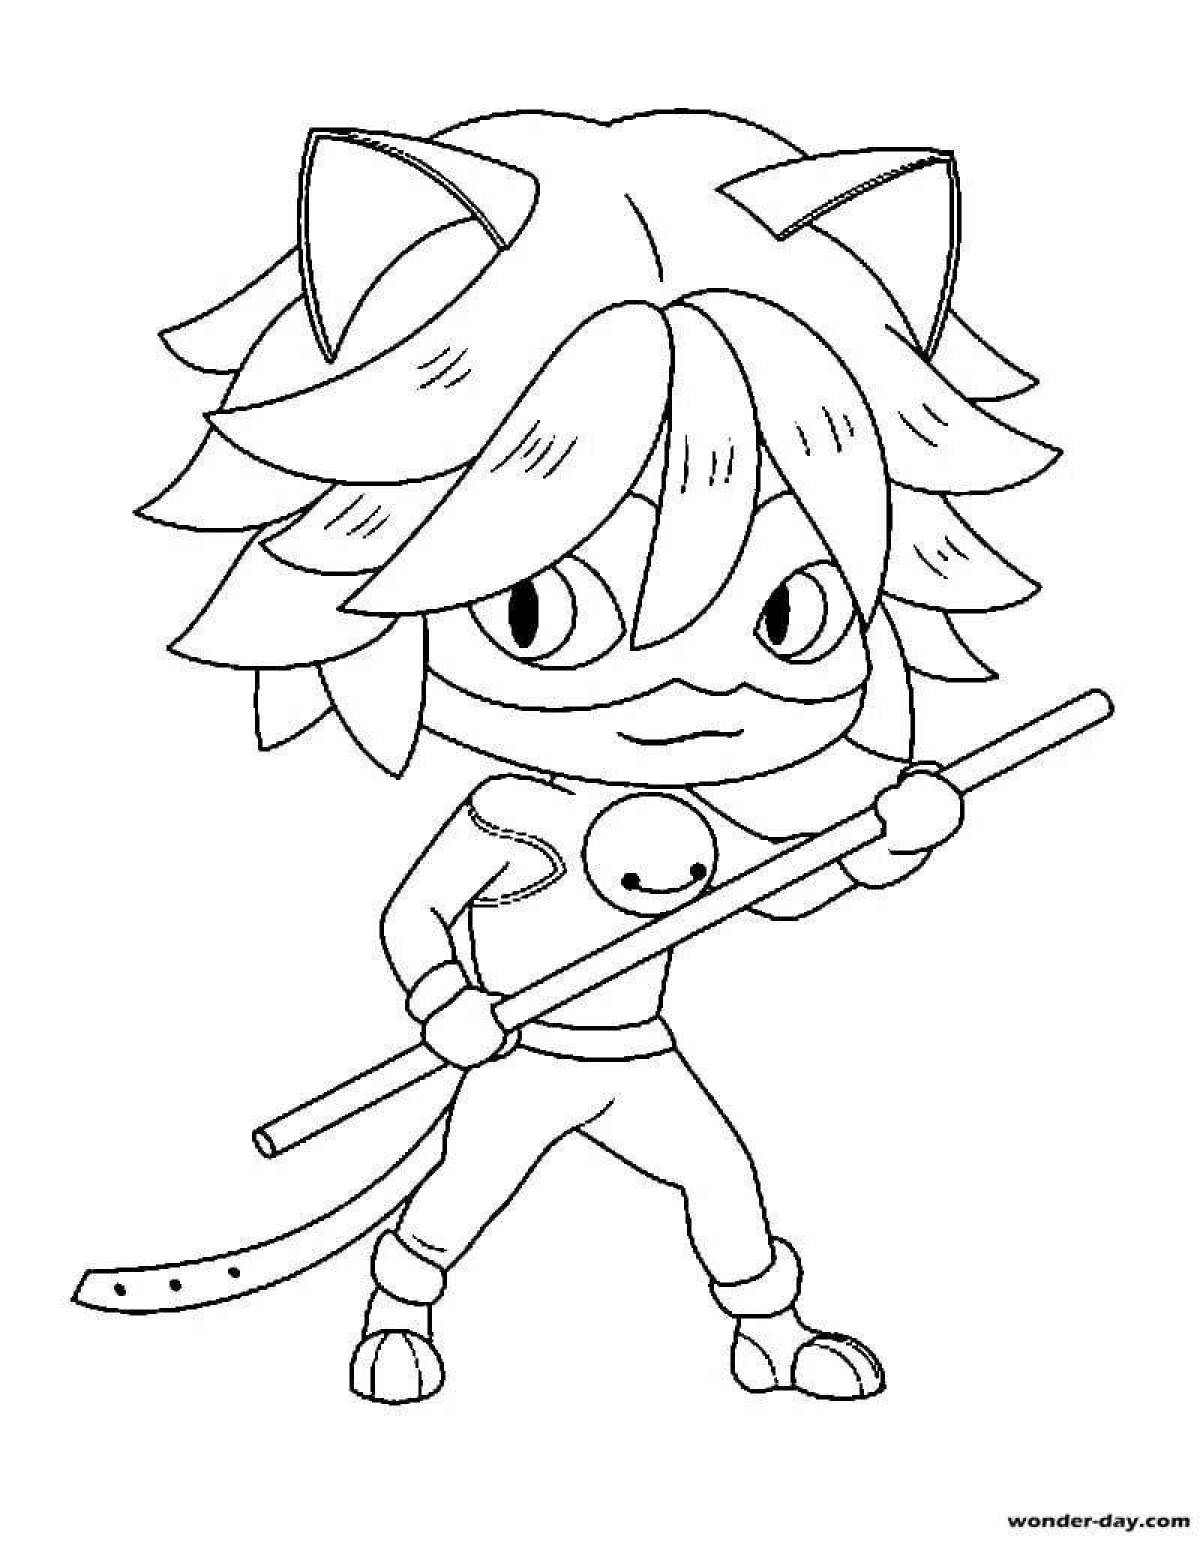 Coloring page charming ladybug and super cat